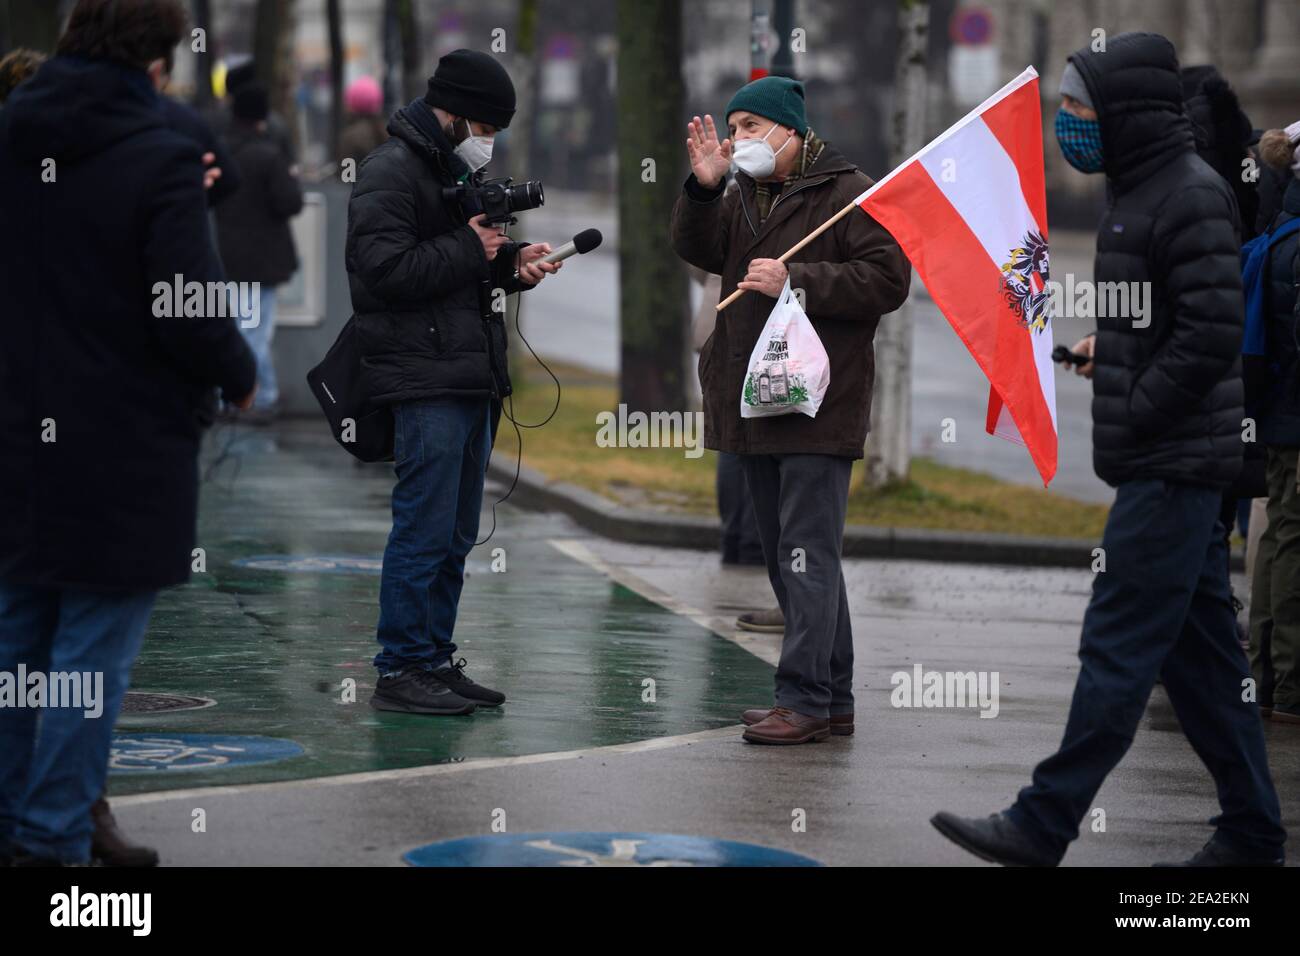 Vienna, Austria. 07th Feb, 2021. A demonstration against the Corona measures will take place at Maria-Theresien-Platz. A demonstration that has not been registered will be advertised as a 'walk' by the organizer. Credit: Franz Perc / Alamy Live News Stock Photo